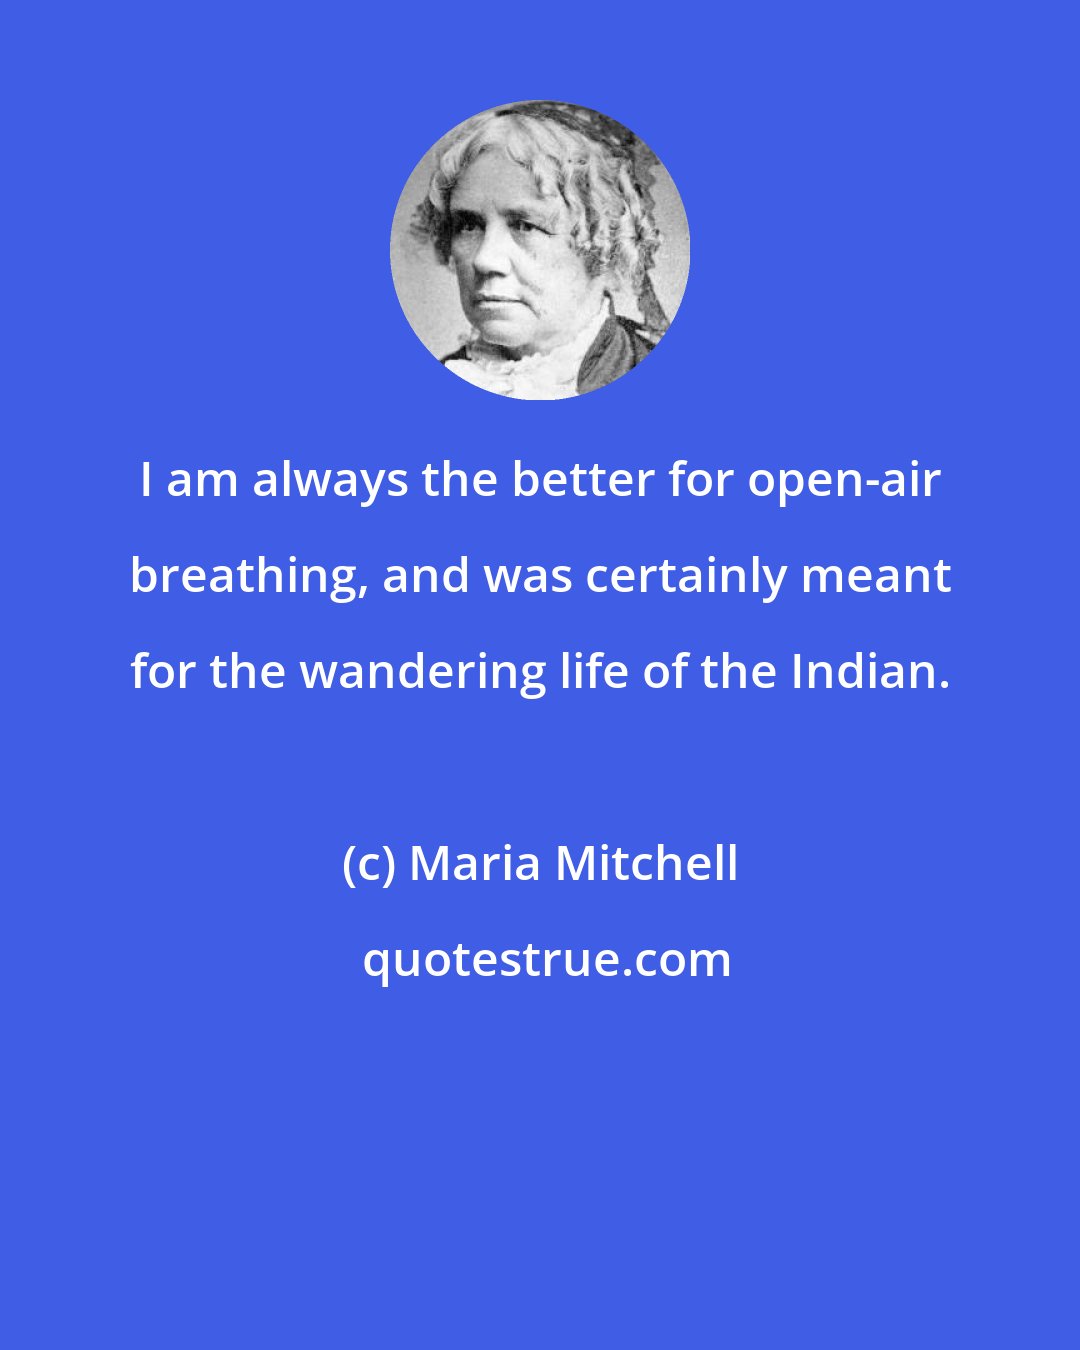 Maria Mitchell: I am always the better for open-air breathing, and was certainly meant for the wandering life of the Indian.